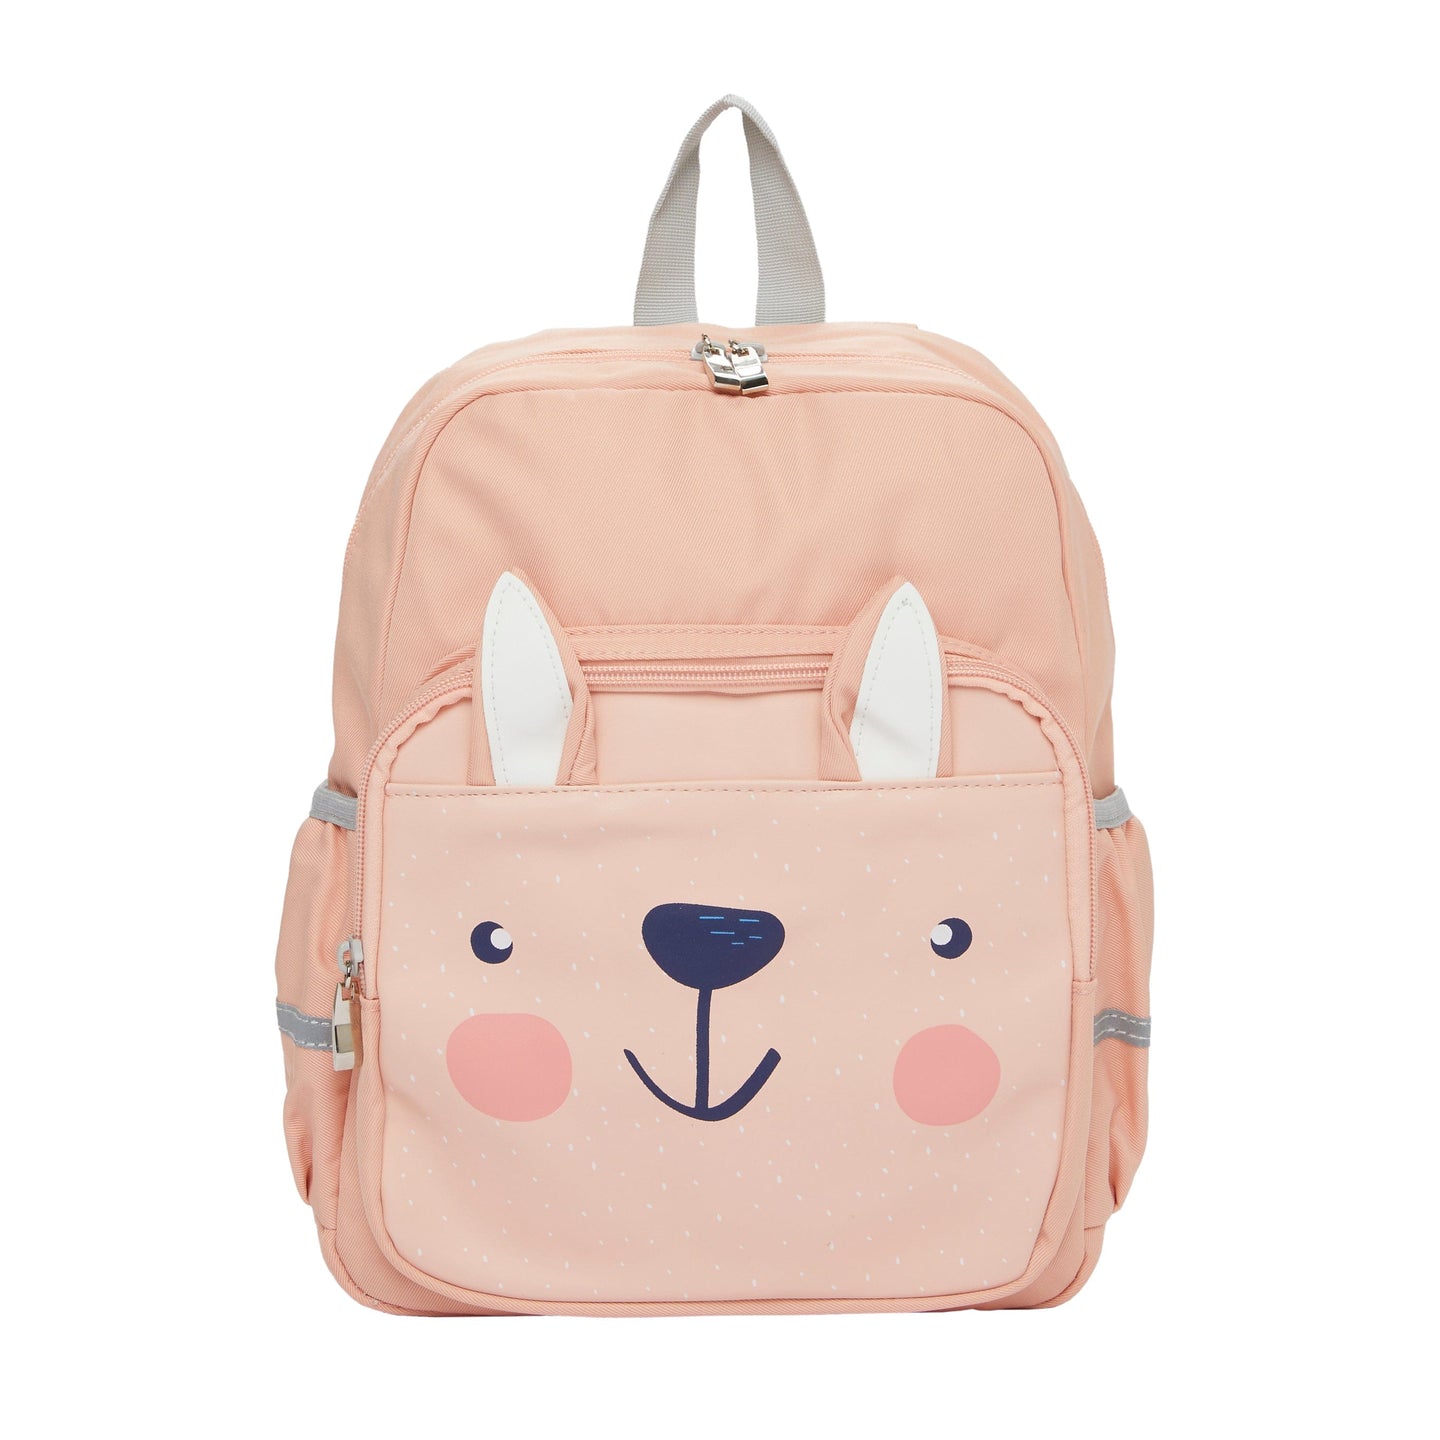 My Bunny Backpack